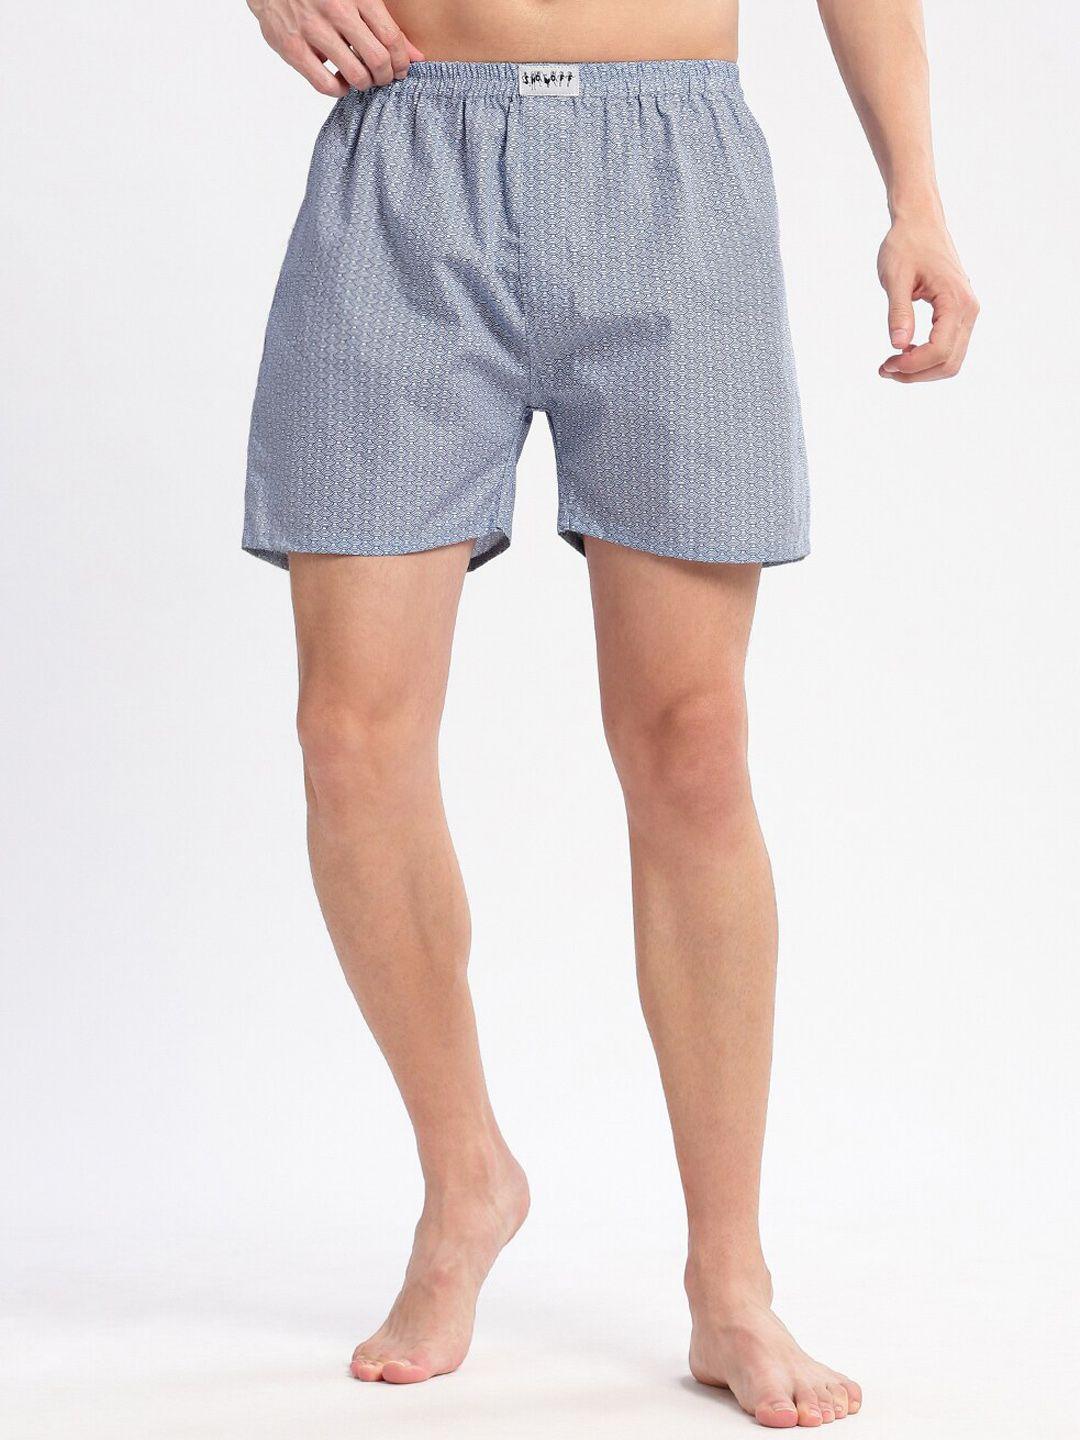 showoff-geometric-printed-cotton-boxers-am-141